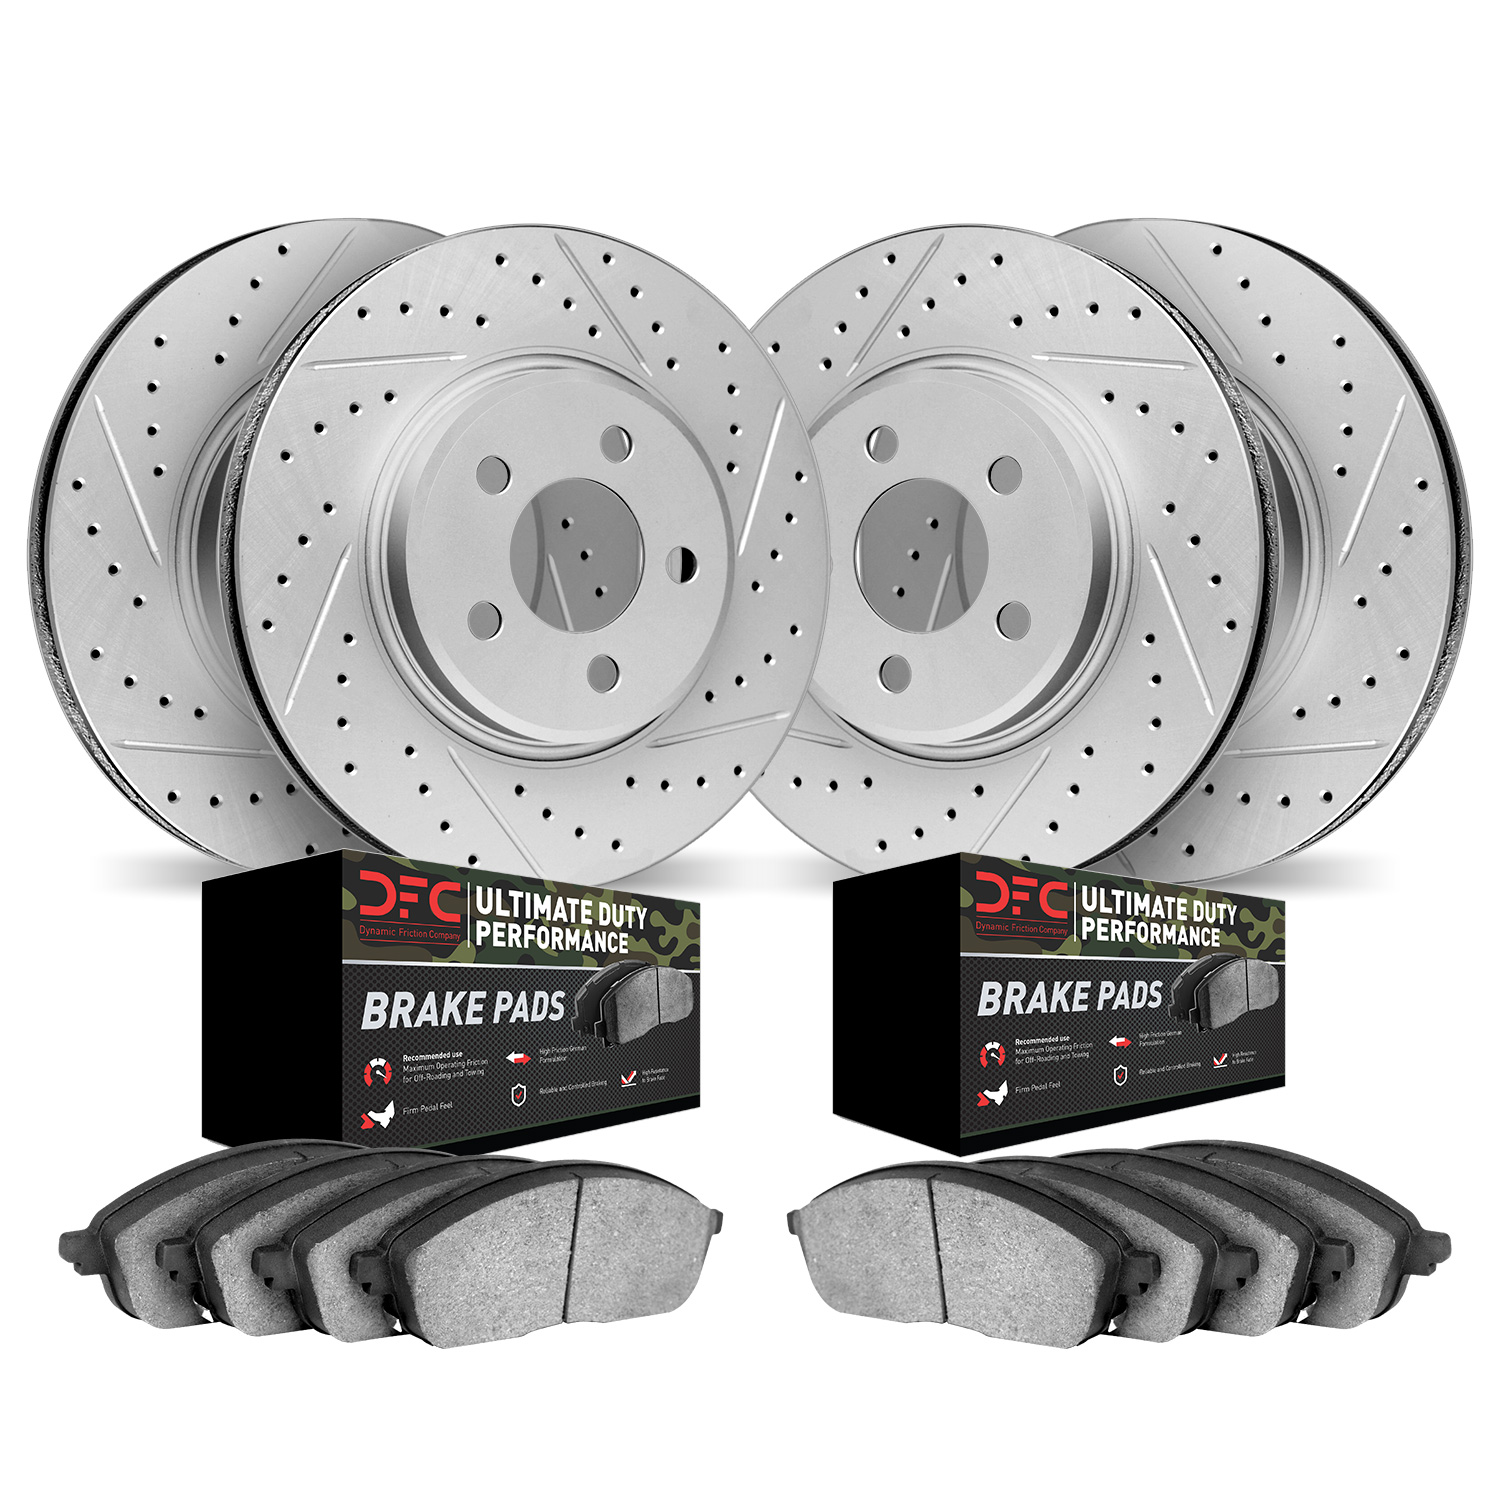 2404-76006 Geoperformance Drilled/Slotted Brake Rotors with Ultimate-Duty Brake Pads Kit, Fits Select Lexus/Toyota/Scion, Positi